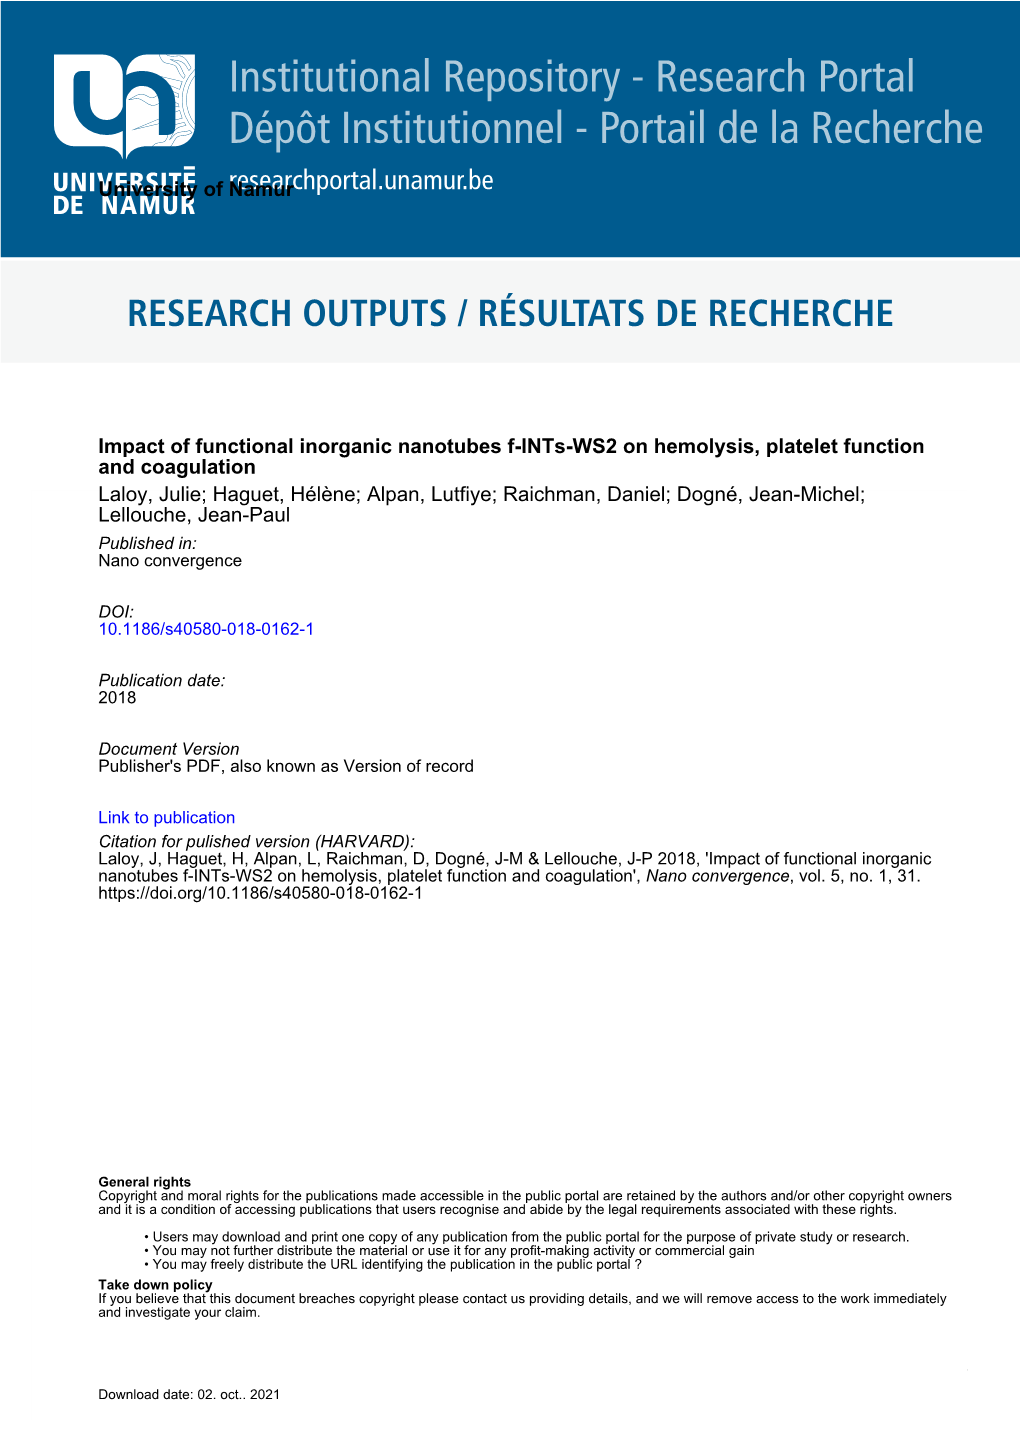 Document Date Version - Date De Publication : Publisher's PDF, Also Known As Version of Record